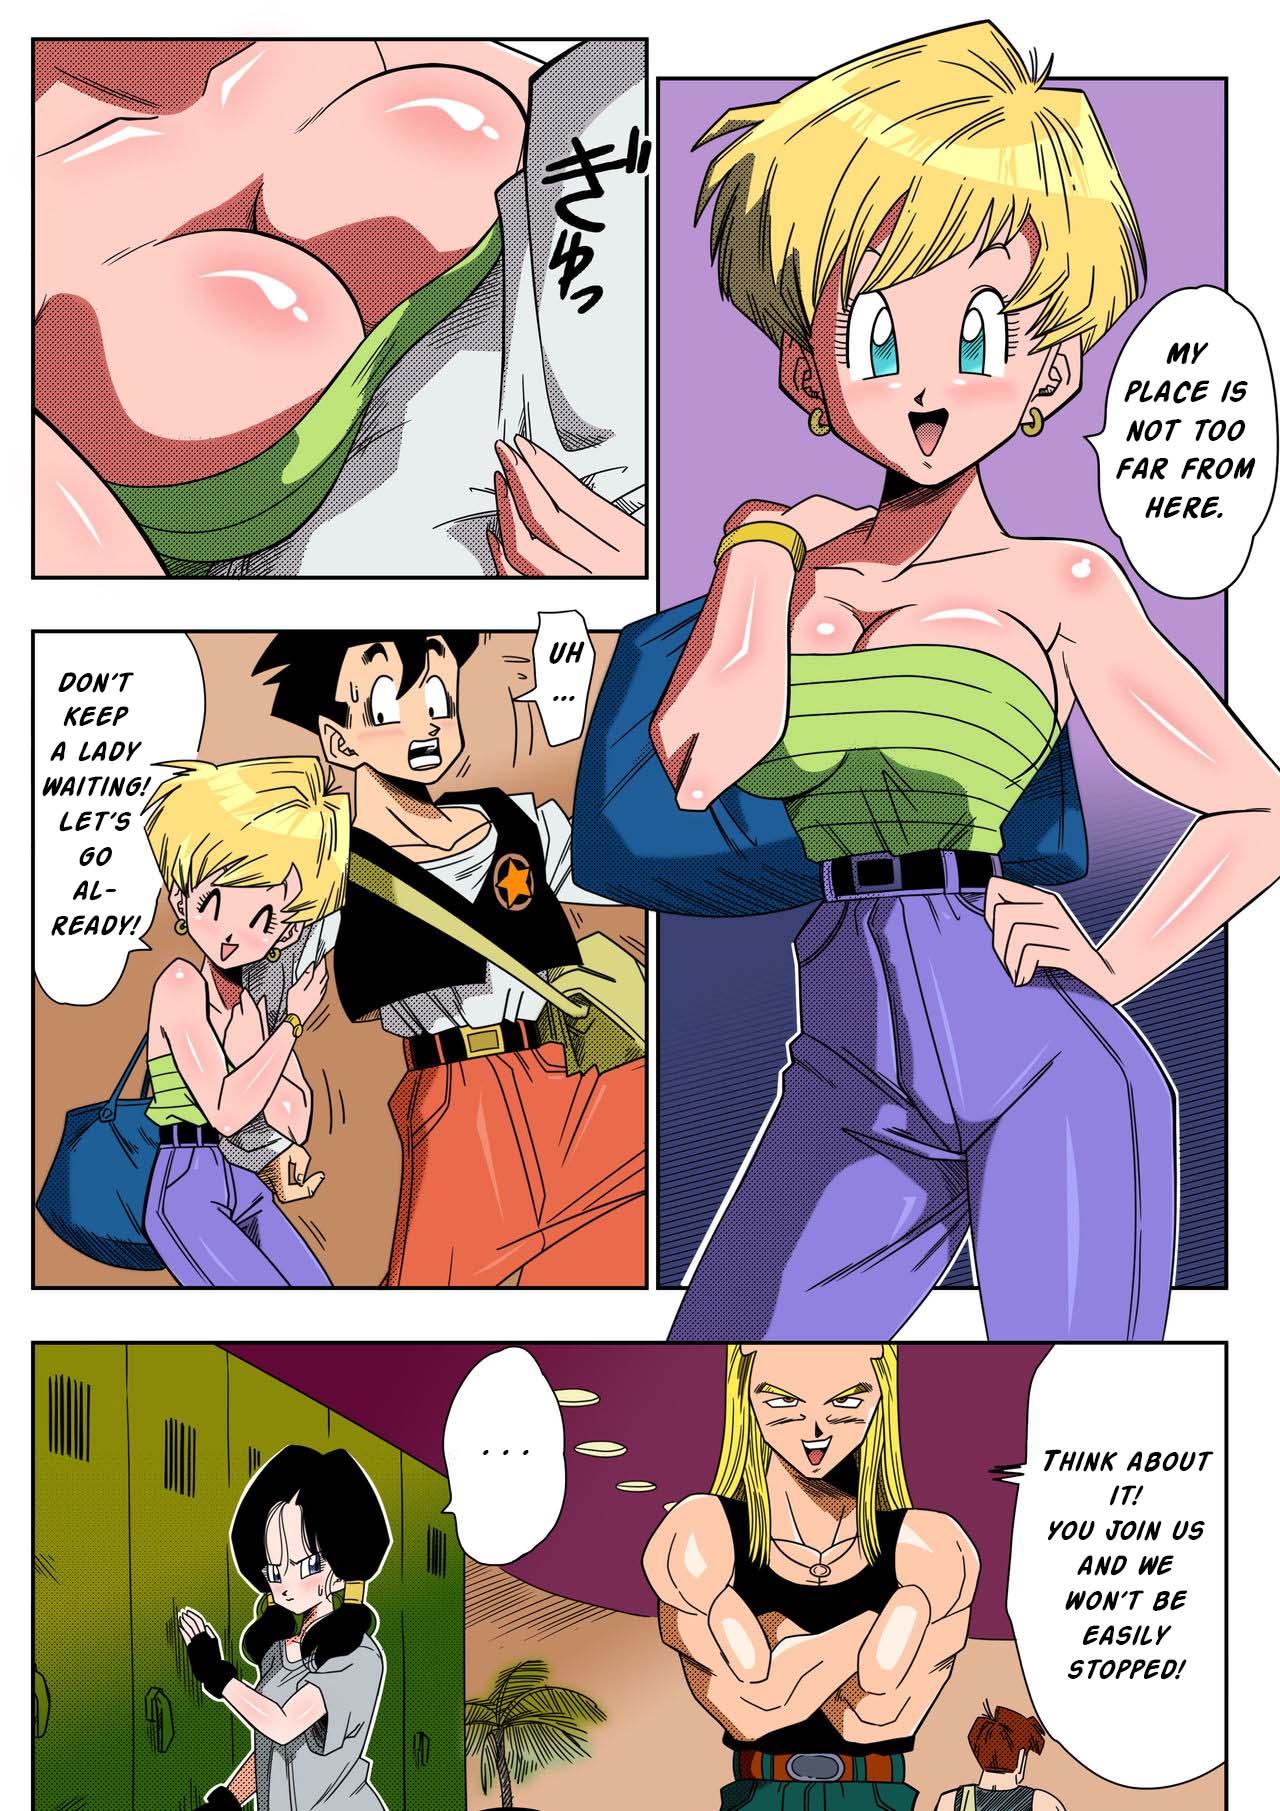 Gay Hairy LOVE TRIANGLE Z Part 1-4 - Dragon ball z Gagging - Page 5